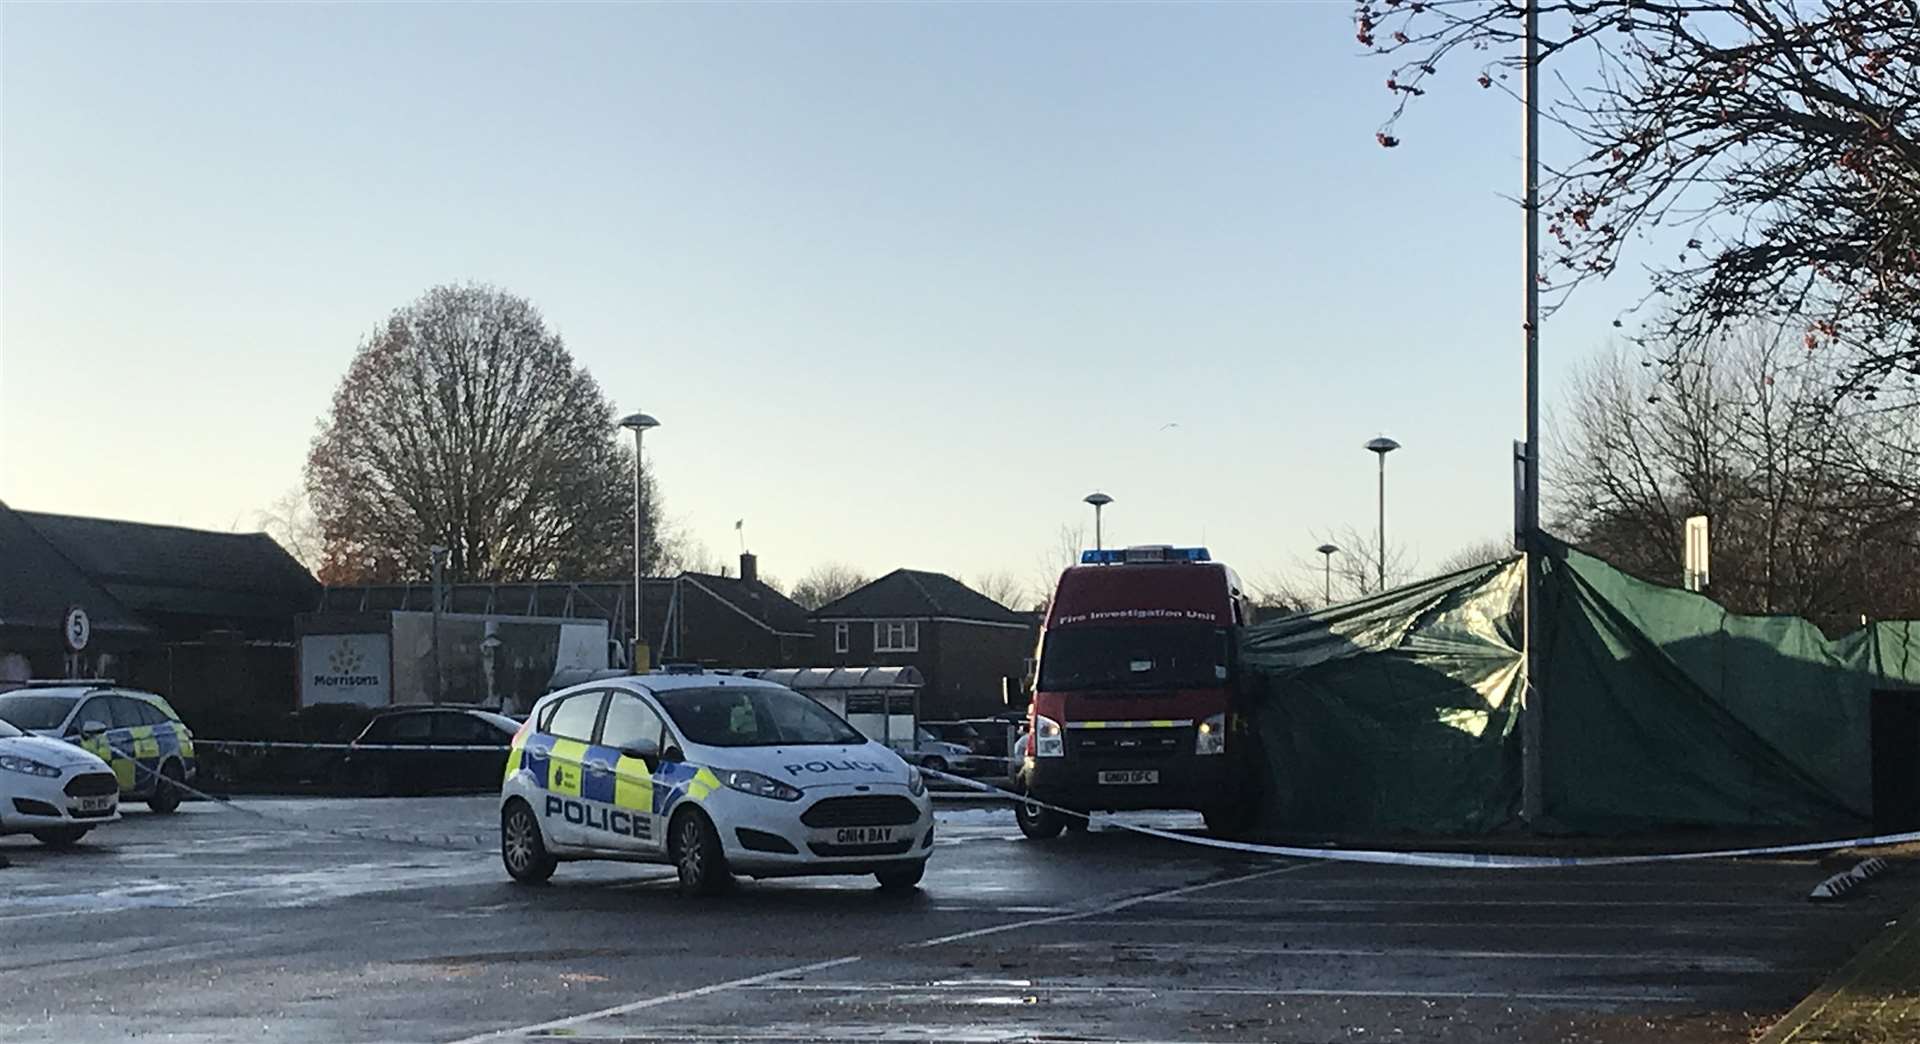 Emergency services at the scene of a fatal car fire at the Morrisons in Maidstone